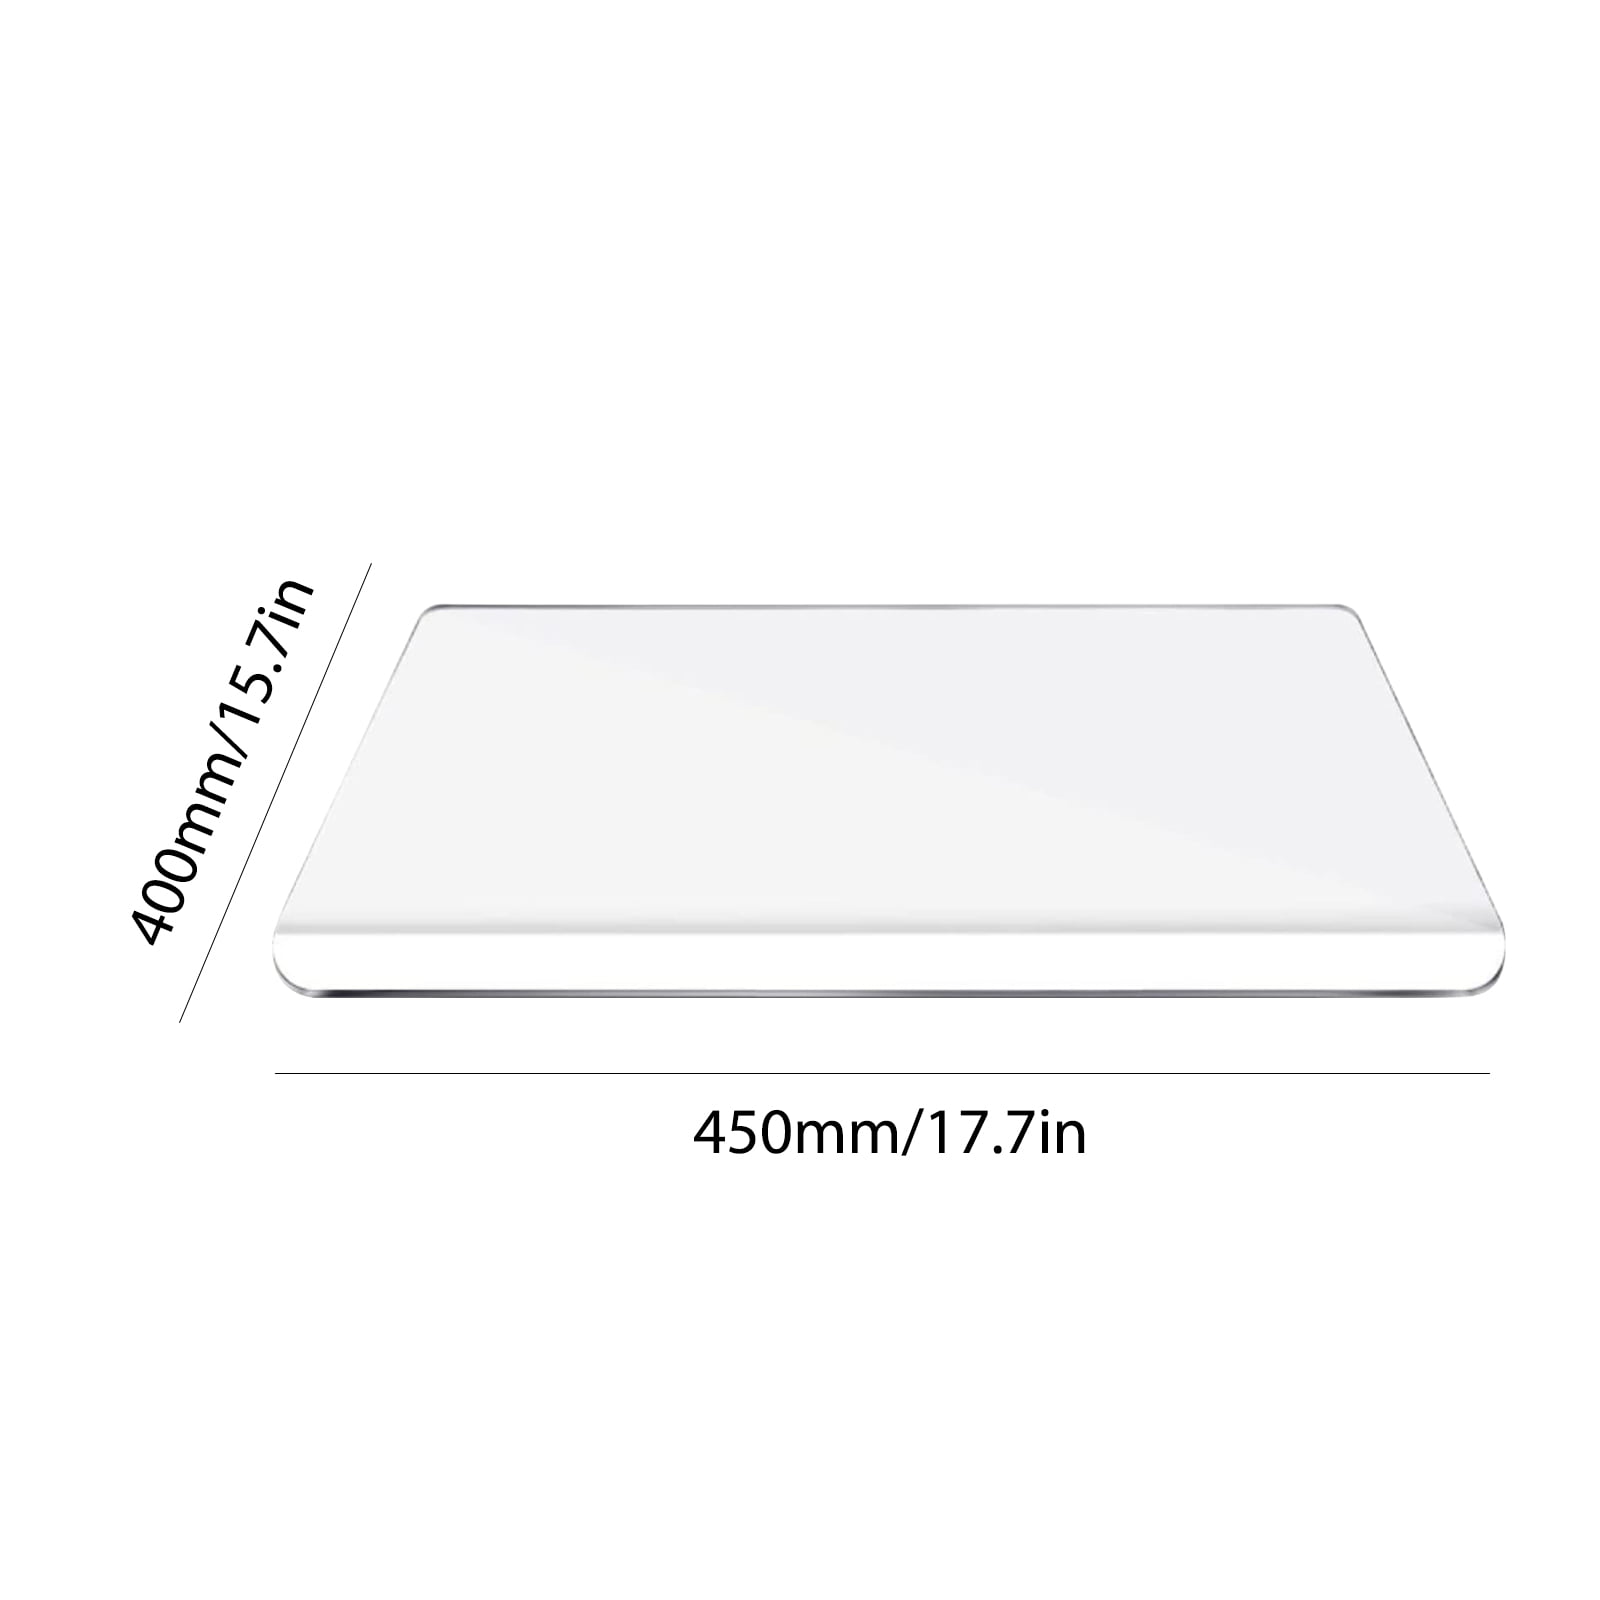 2 Pieces Acrylic, Clear Chopping Board Non Slip Cutting Boards for Kitchen